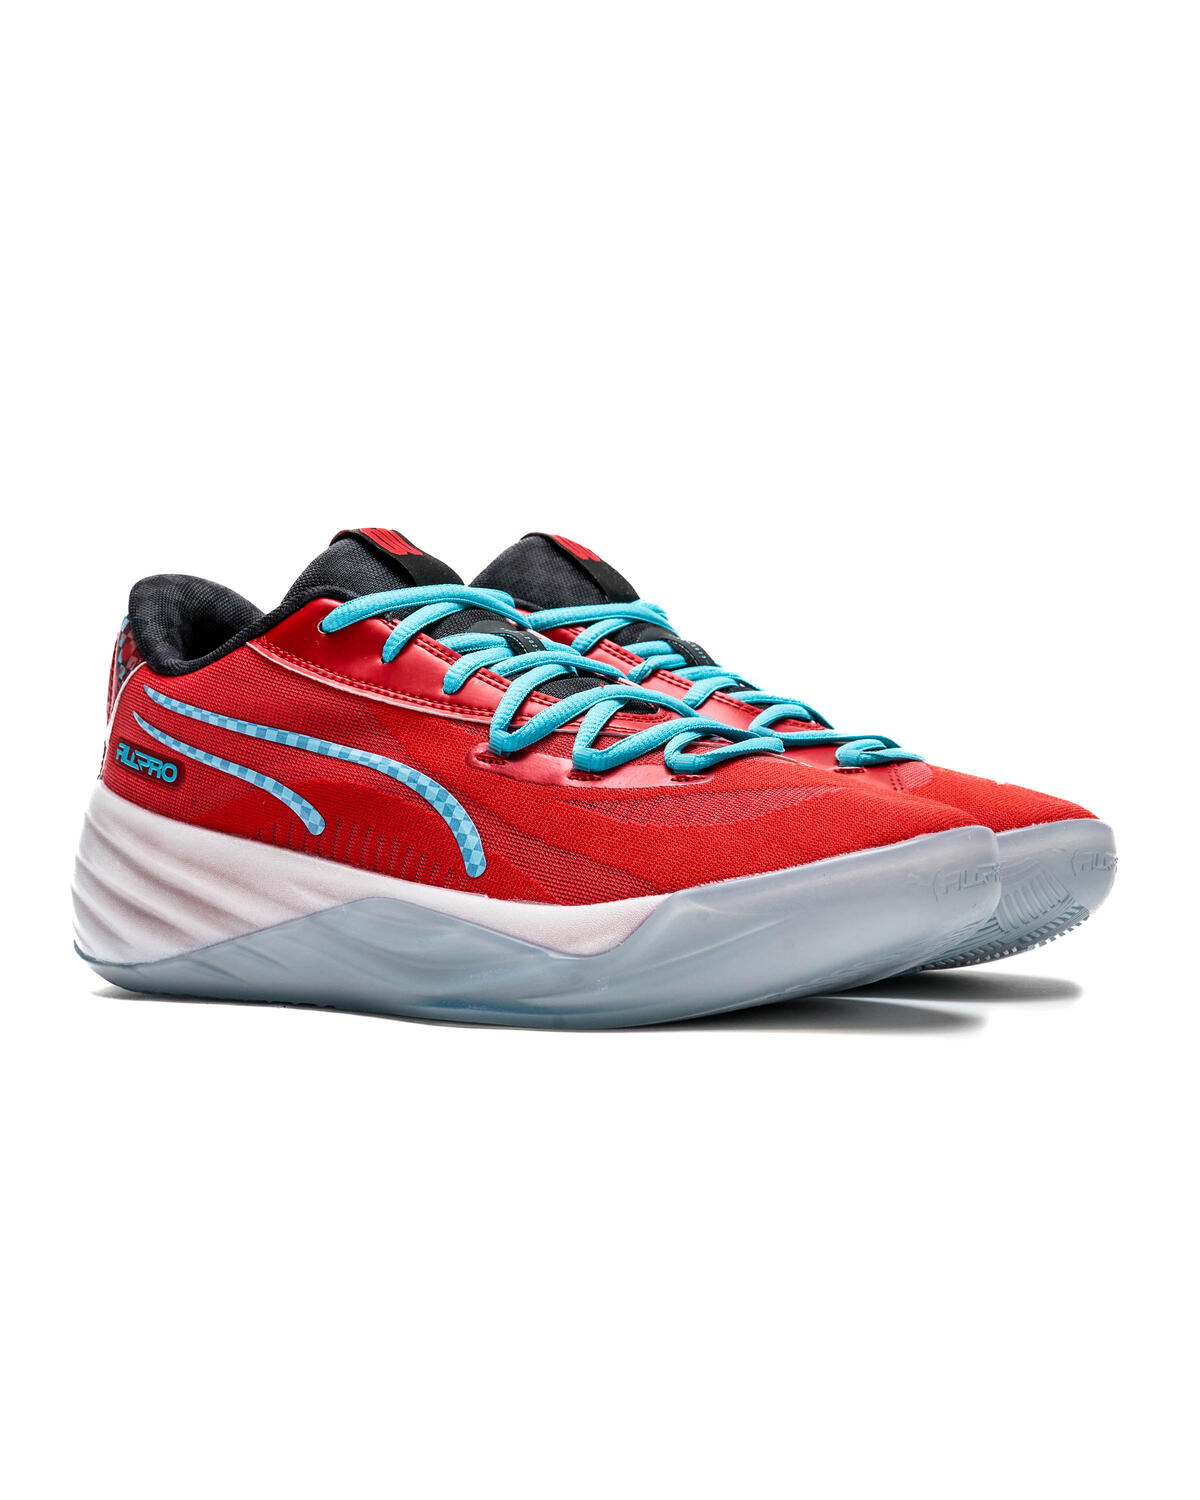 Puma All-Pro Nitro: One of the Best Basketball Shoes of 2023 